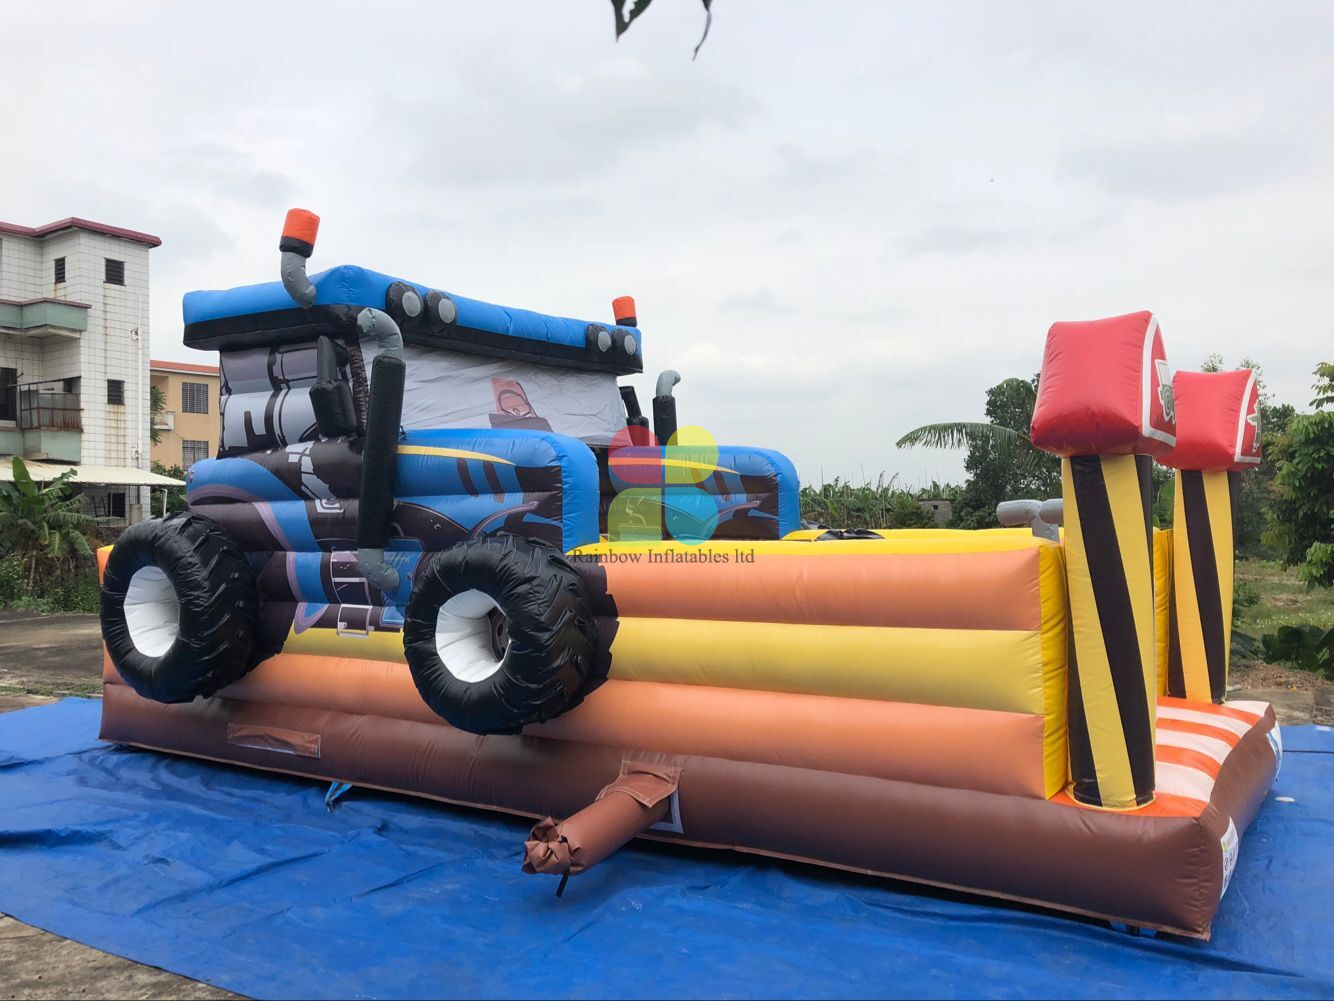 Inflatable Tractor Bouncer with Slide